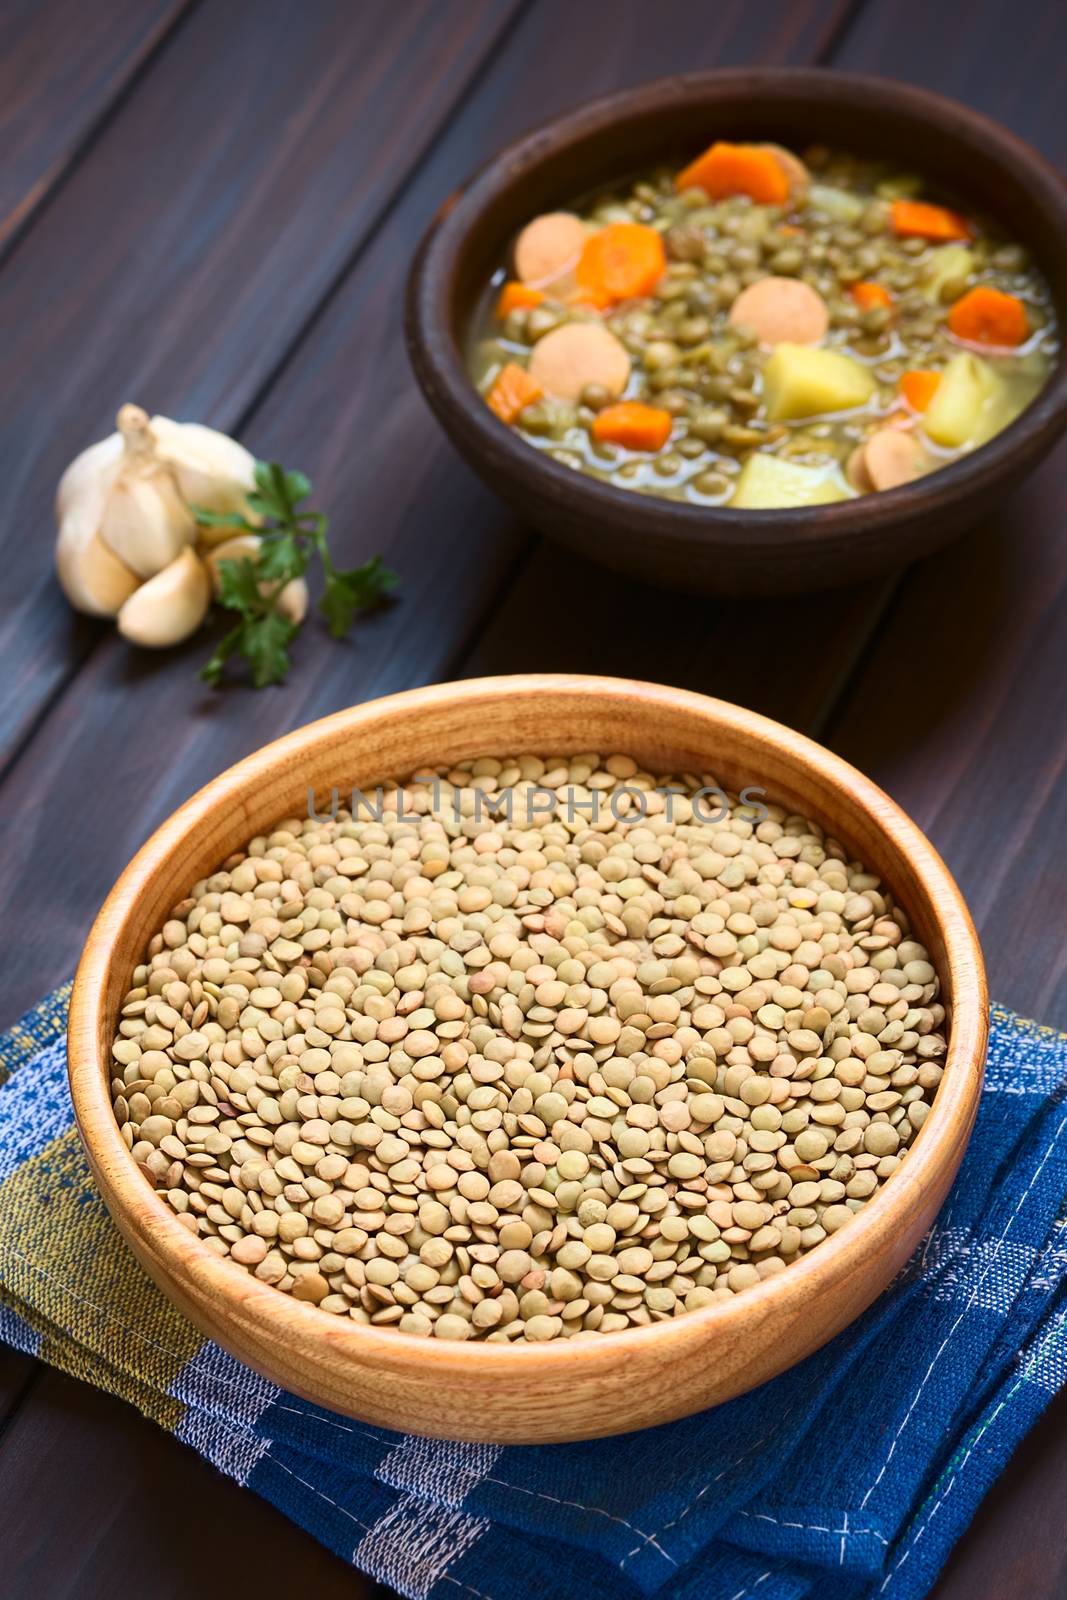 Raw lentils (lat. Lens culinaris) in wooden bowl with a rustic bowl of lentil soup (made with lentil, carrot, potato, sausage) in the back, photographed on dark wood with natural light (Selective Focus, Focus one third into the raw lentils)